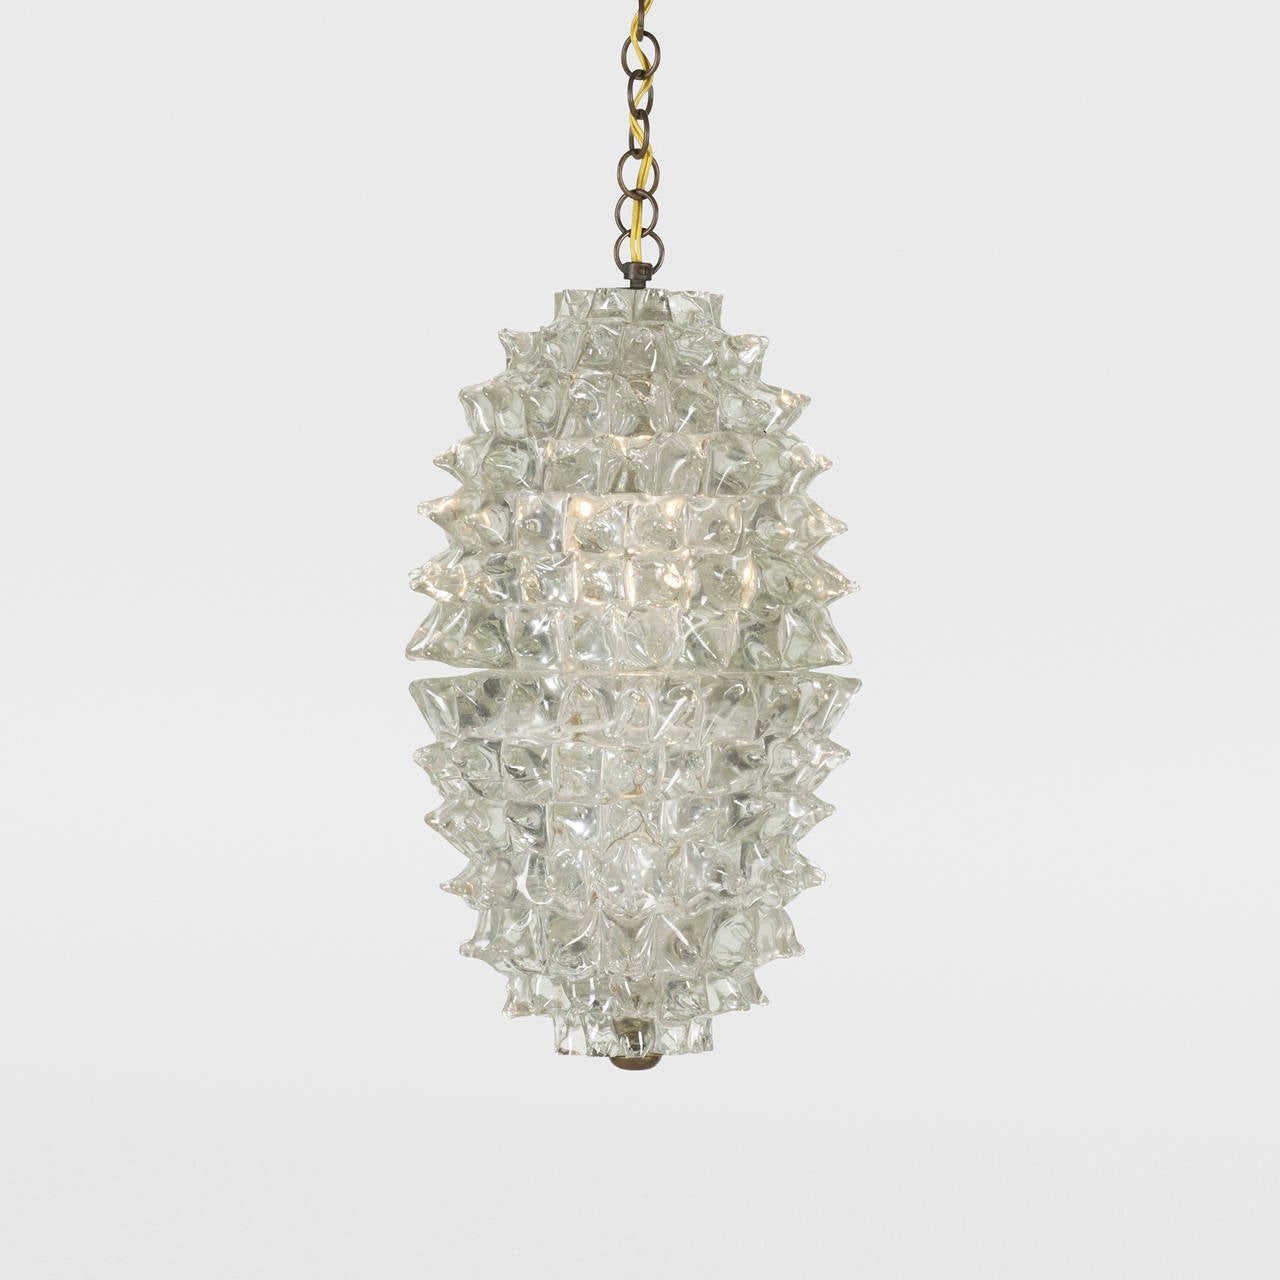 Barovier and Toso pendant lamp.